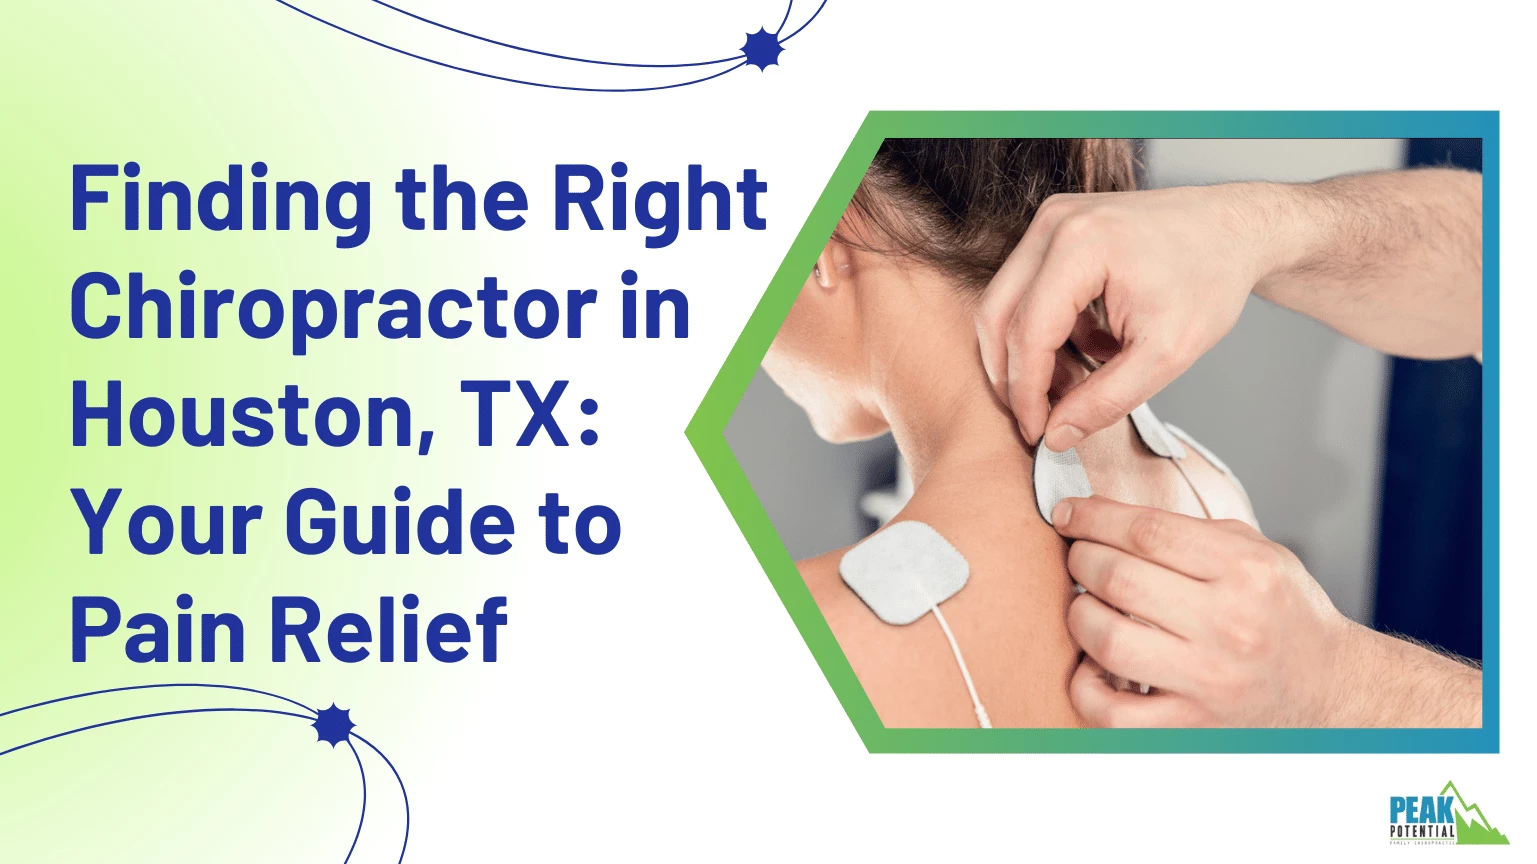 Finding the Right Chiropractor in Houston, TX: Your Guide to Pain Relief